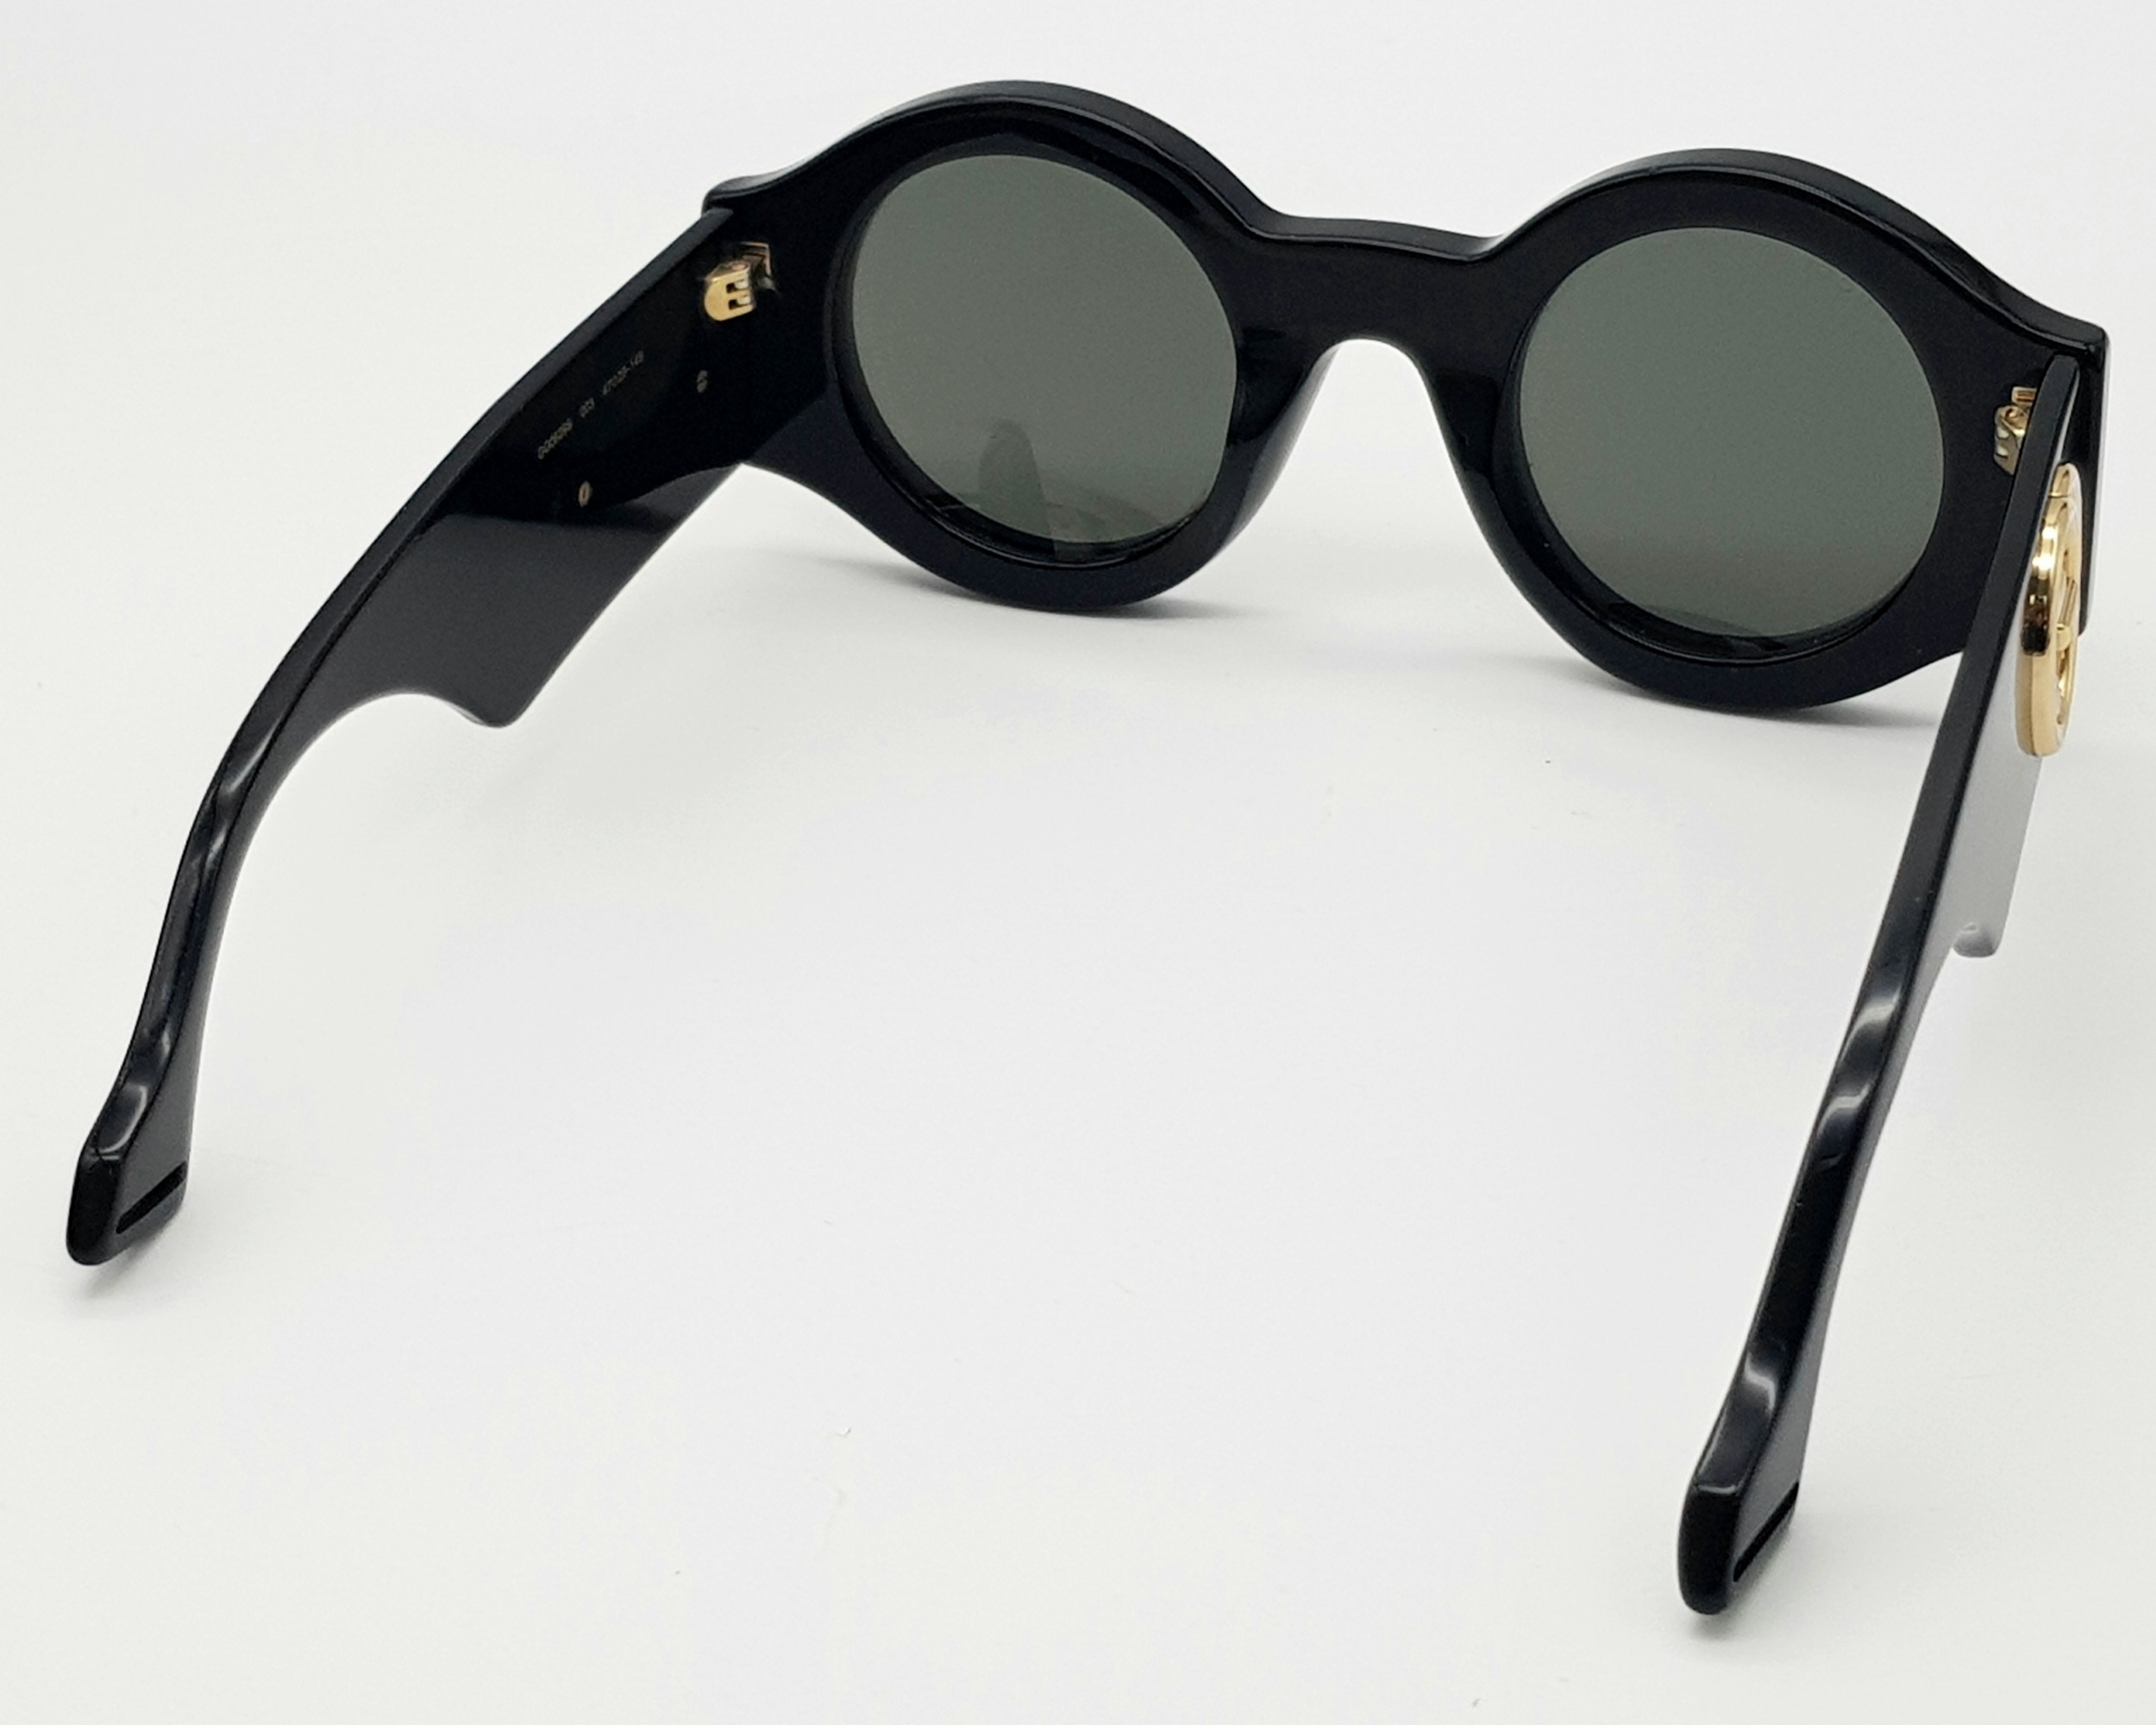 A Pair of Gucci Black Round Sunglasses. Gold-toned GG logos to sides. Thick frames. Comes with - Image 3 of 7